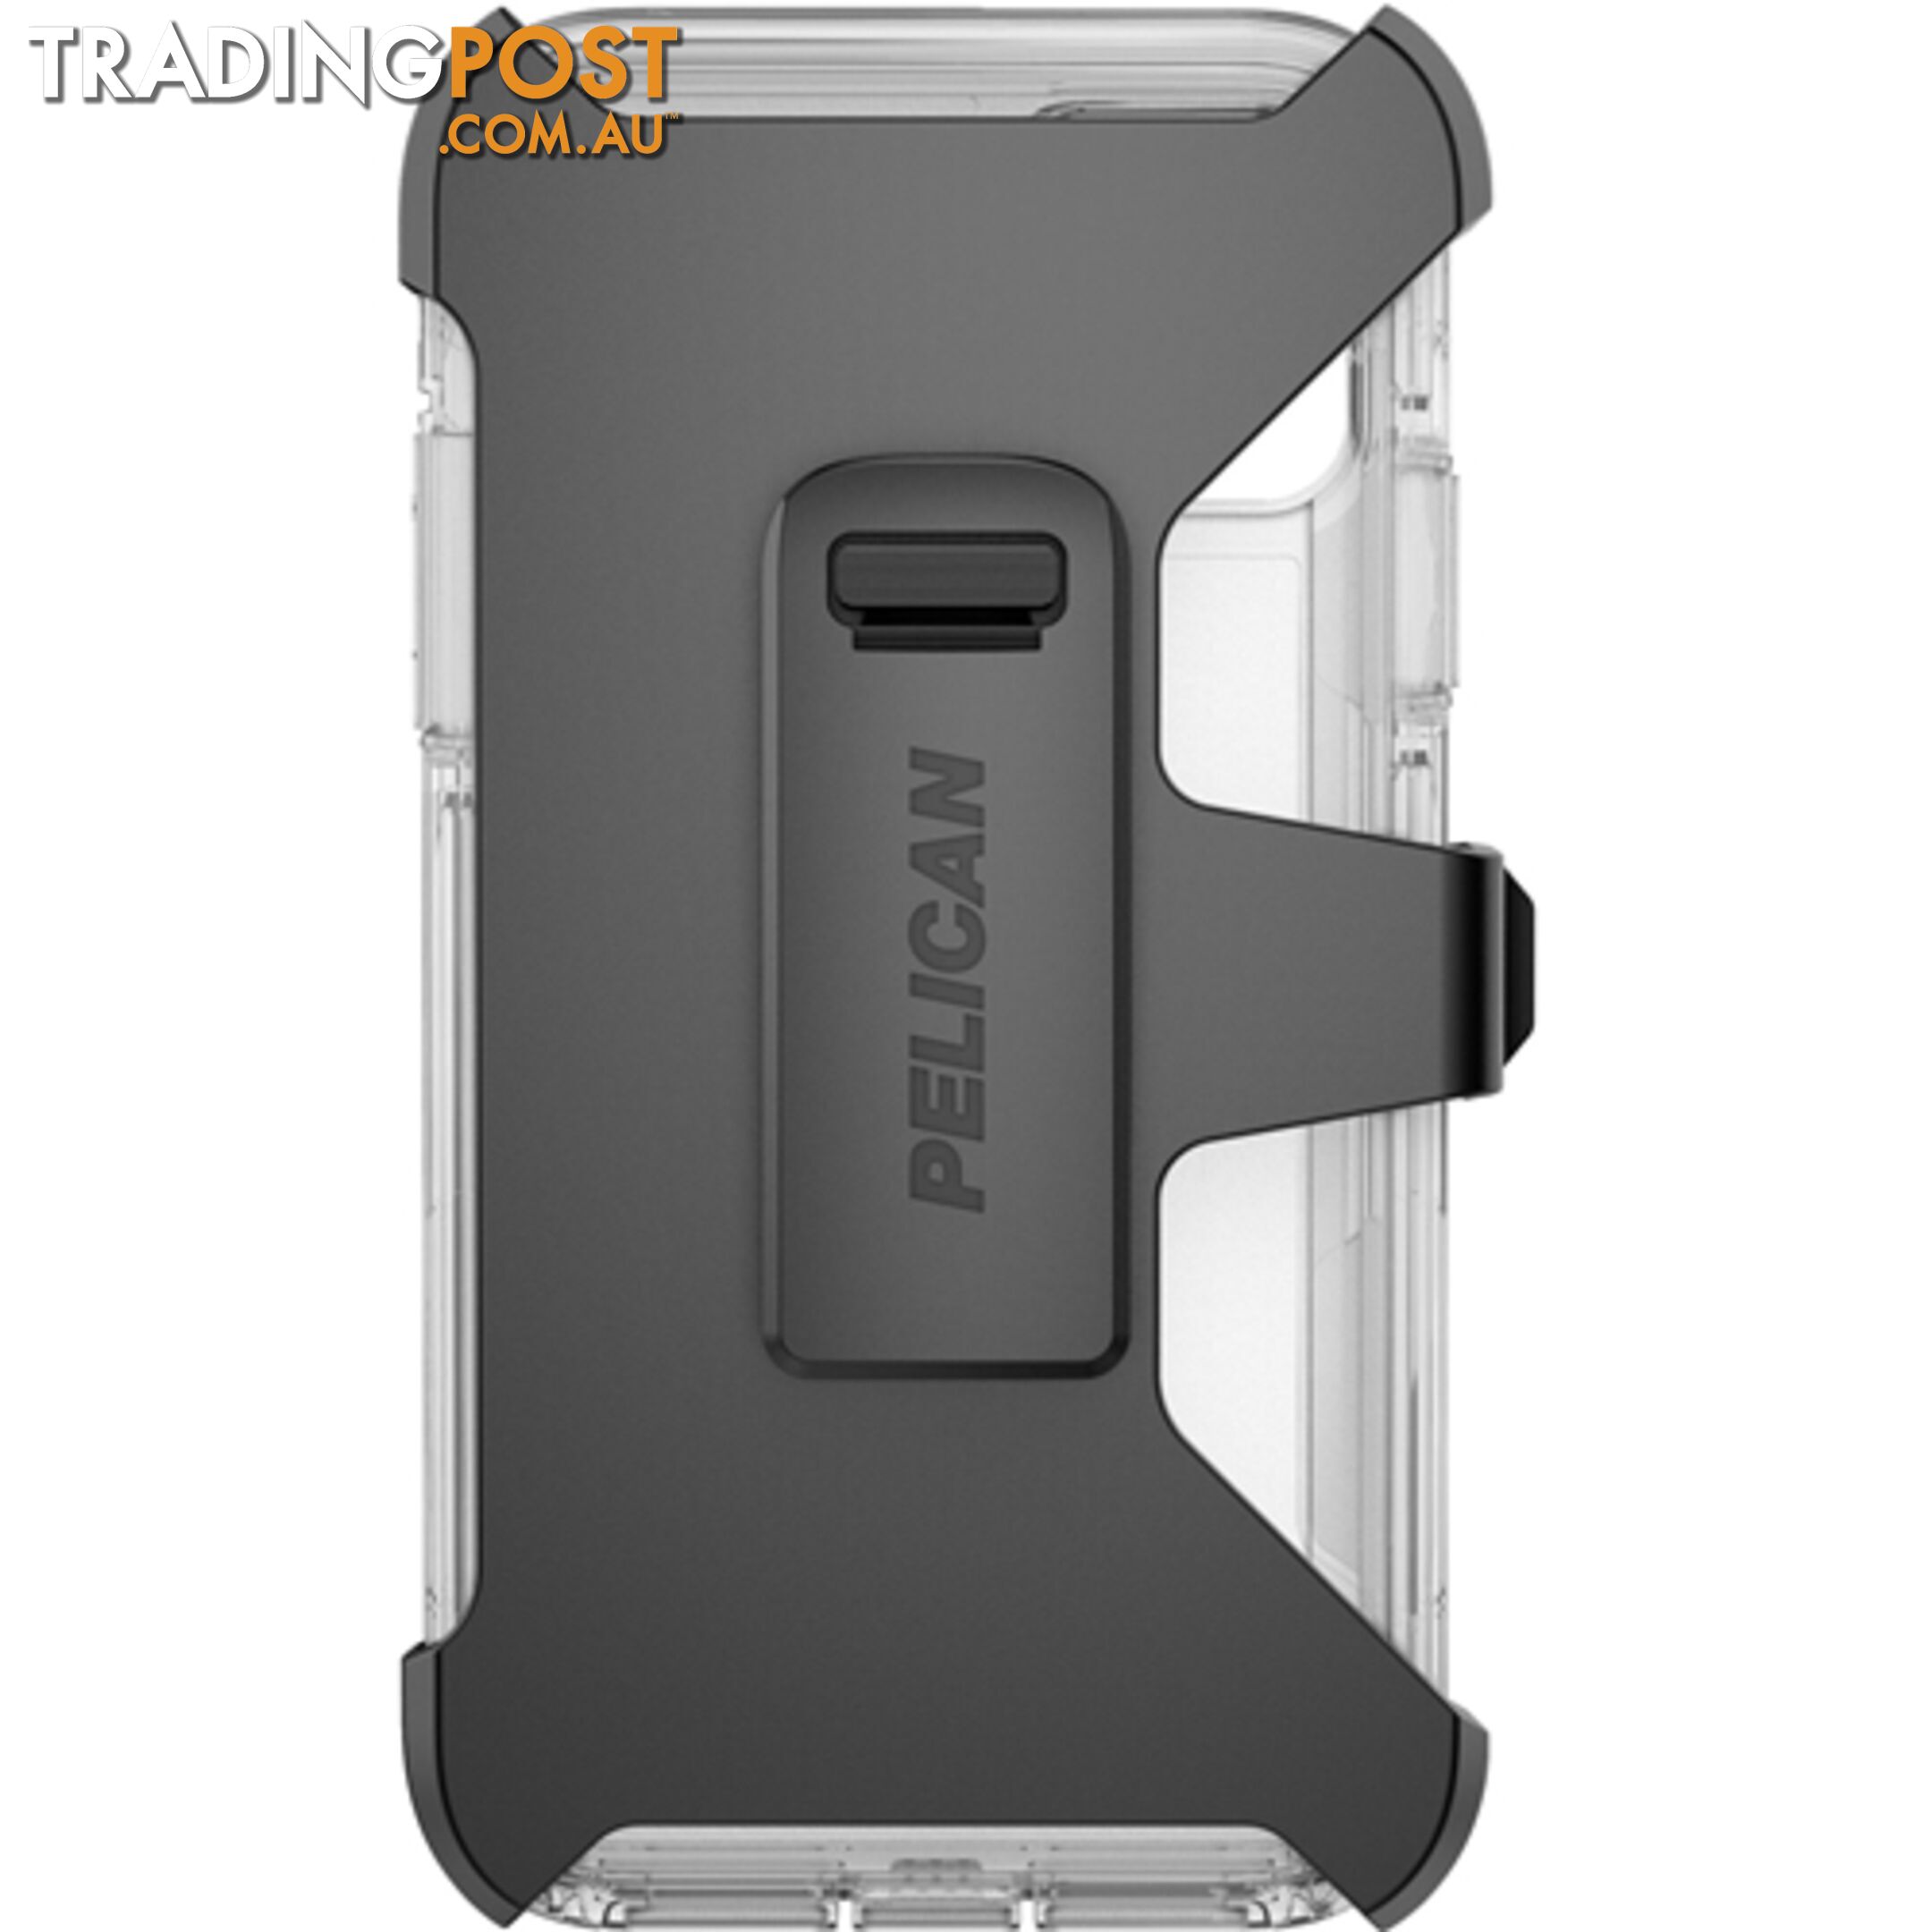 Pelican Voyager Extreme Rugged Case & Belt Clip iPhone 11 Pro - Clear - 19428171544/C55030-001A-CLCL - Pelican